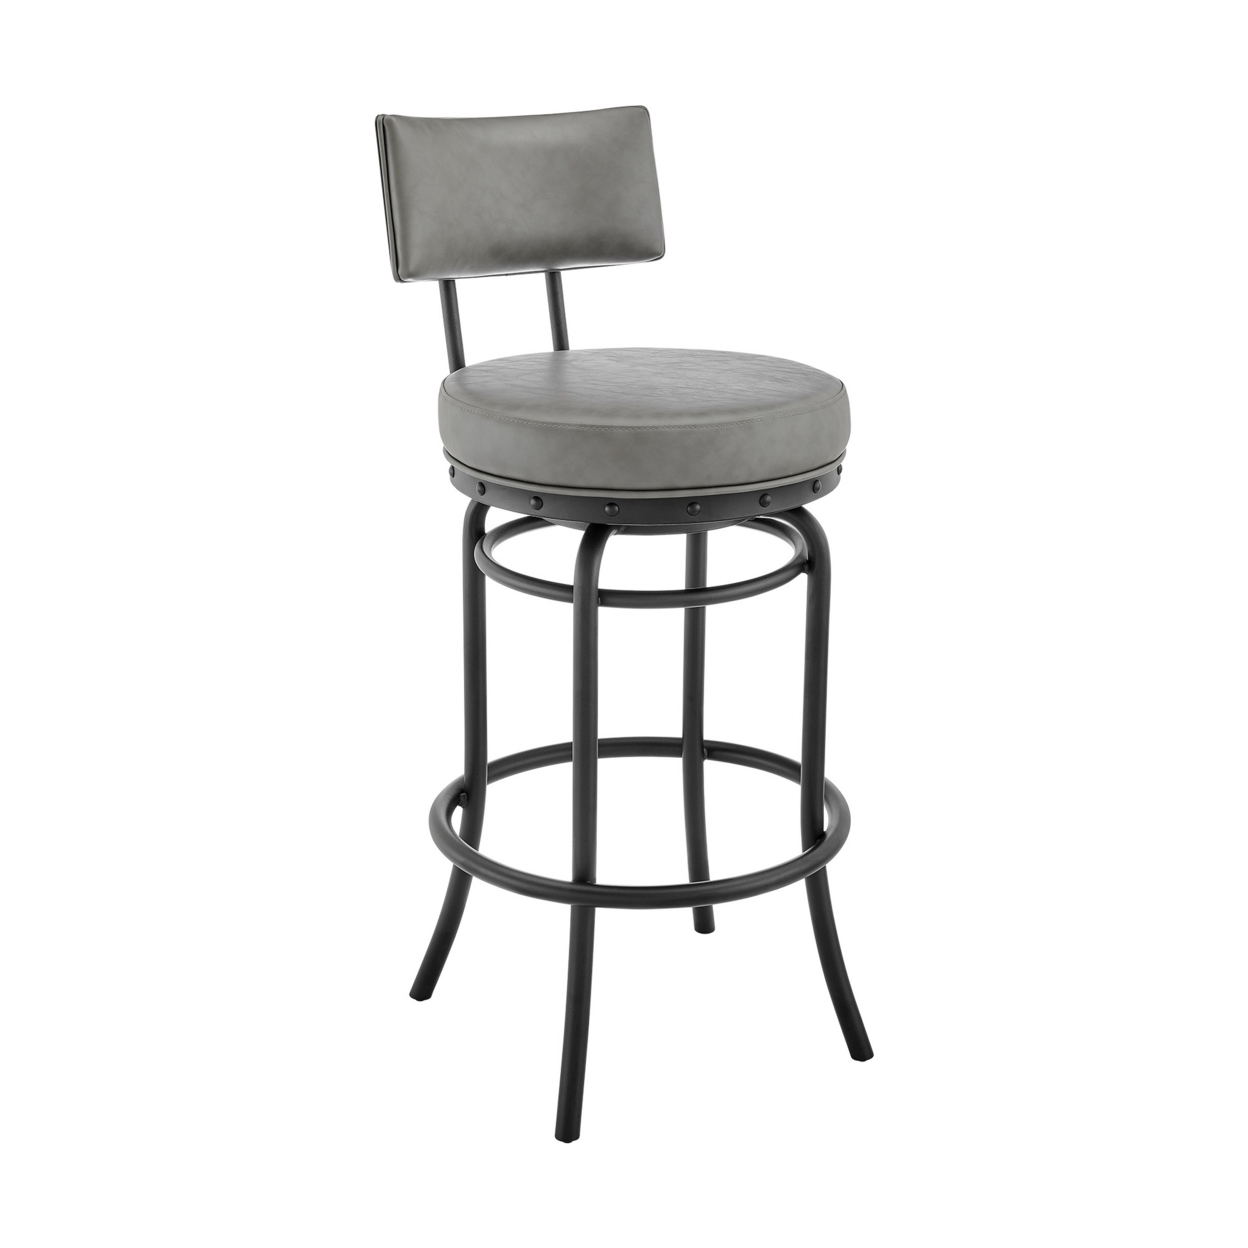 Felicity 26 Inch Swivel Counter Stool Chair, Round Gray Faux Leather Seat- Saltoro Sherpi